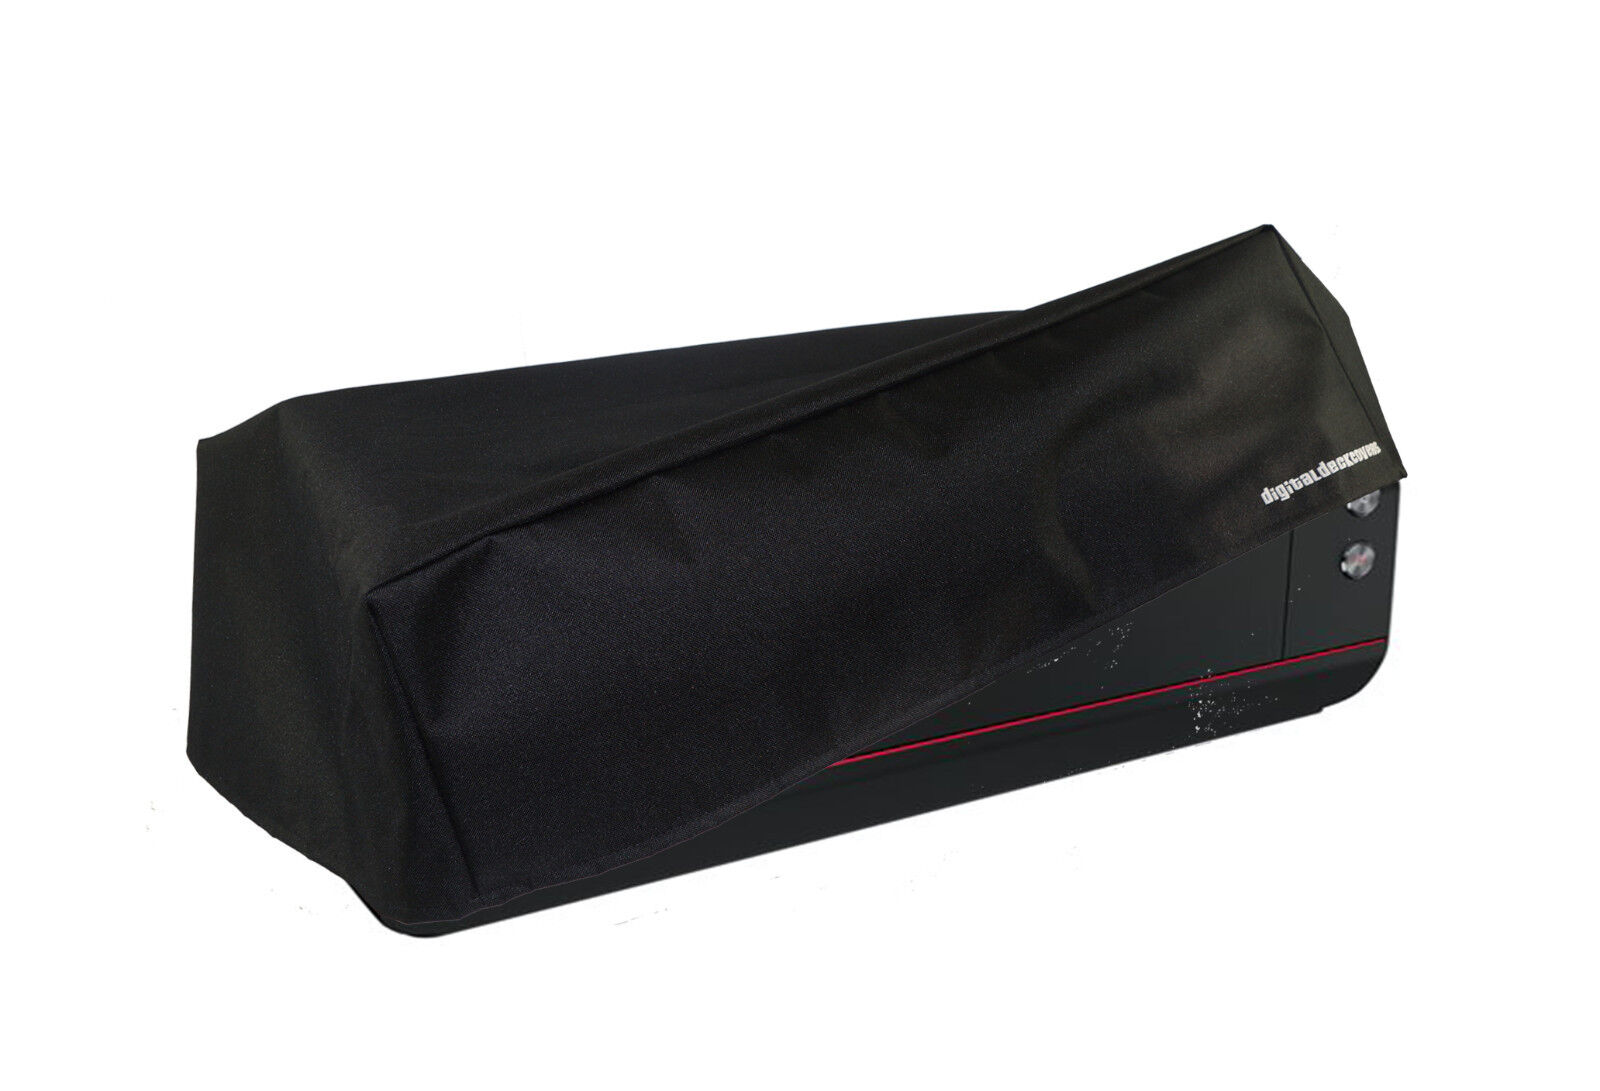 Printer Dust Cover for Canon imagePROGRAF PRO-300 Printers Protector